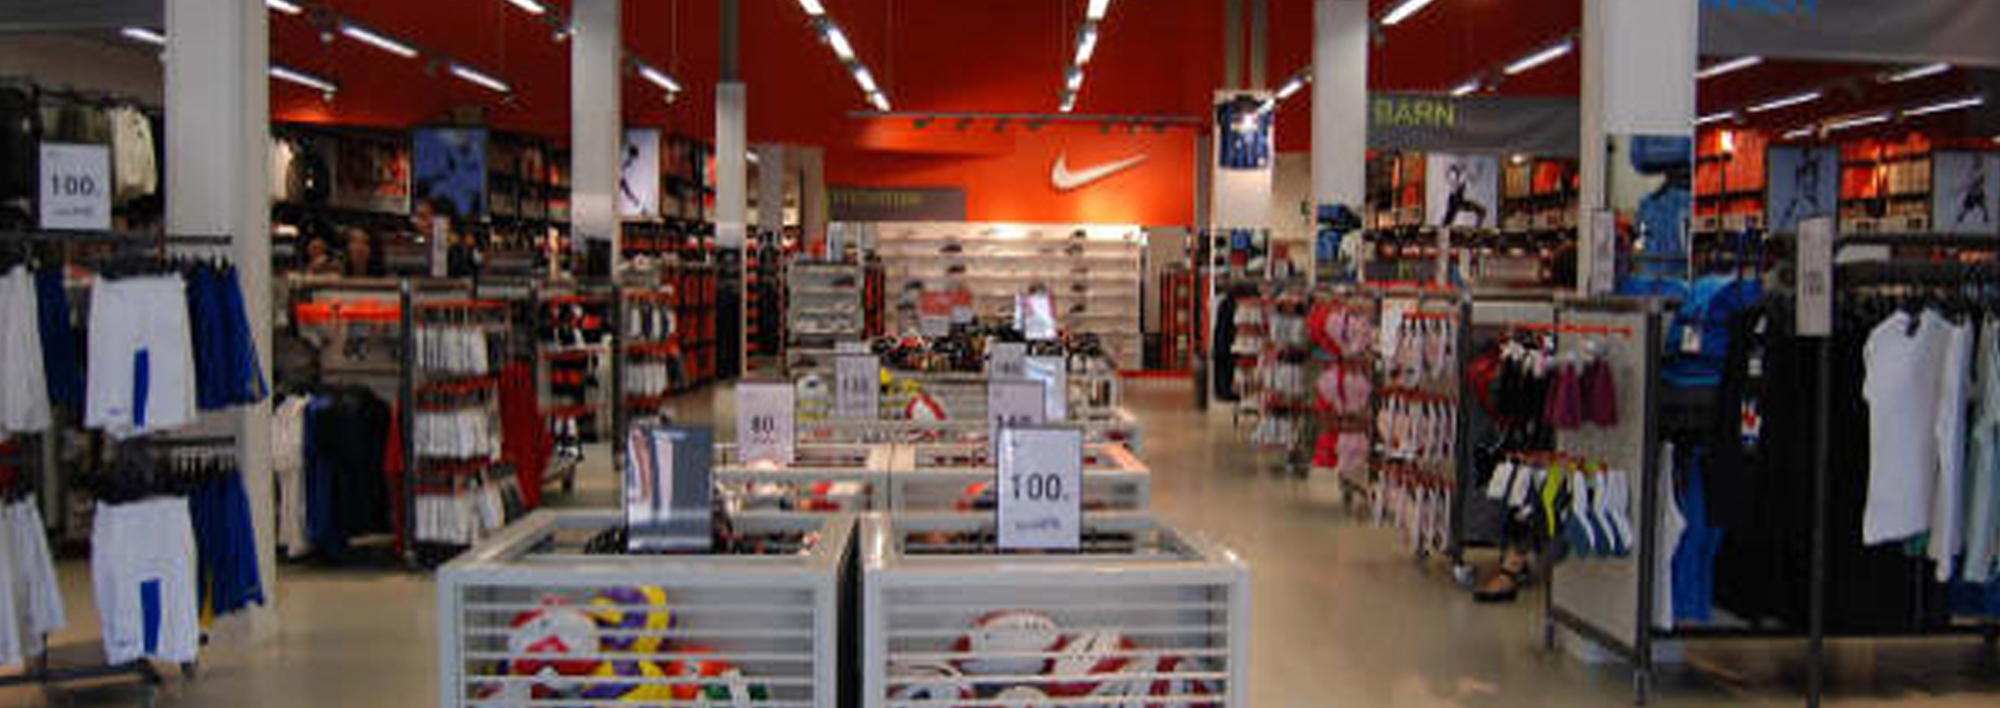 nike barkarby outlet